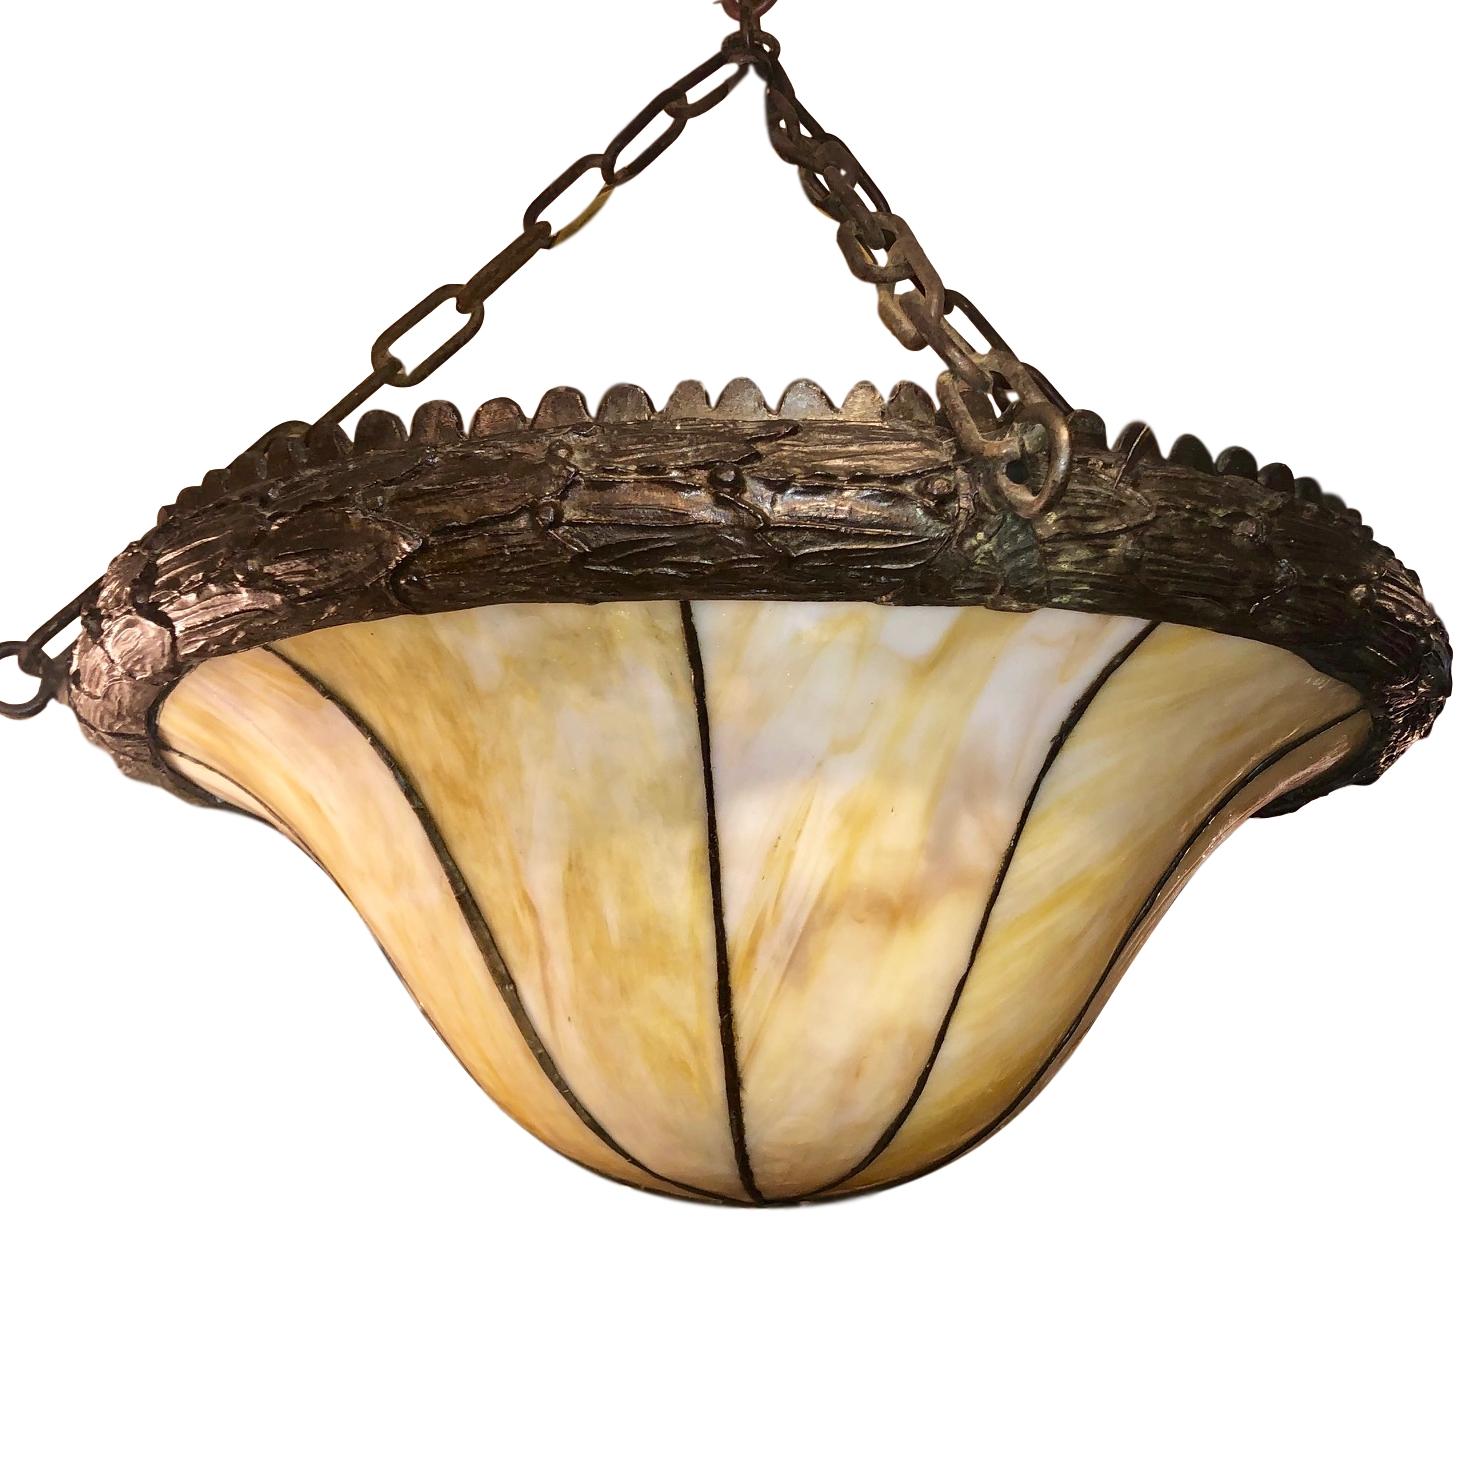 A circa 1910 English leaded glass pendant light fixture with amber tones in the glass.

Measurements:
Minimum drop 24